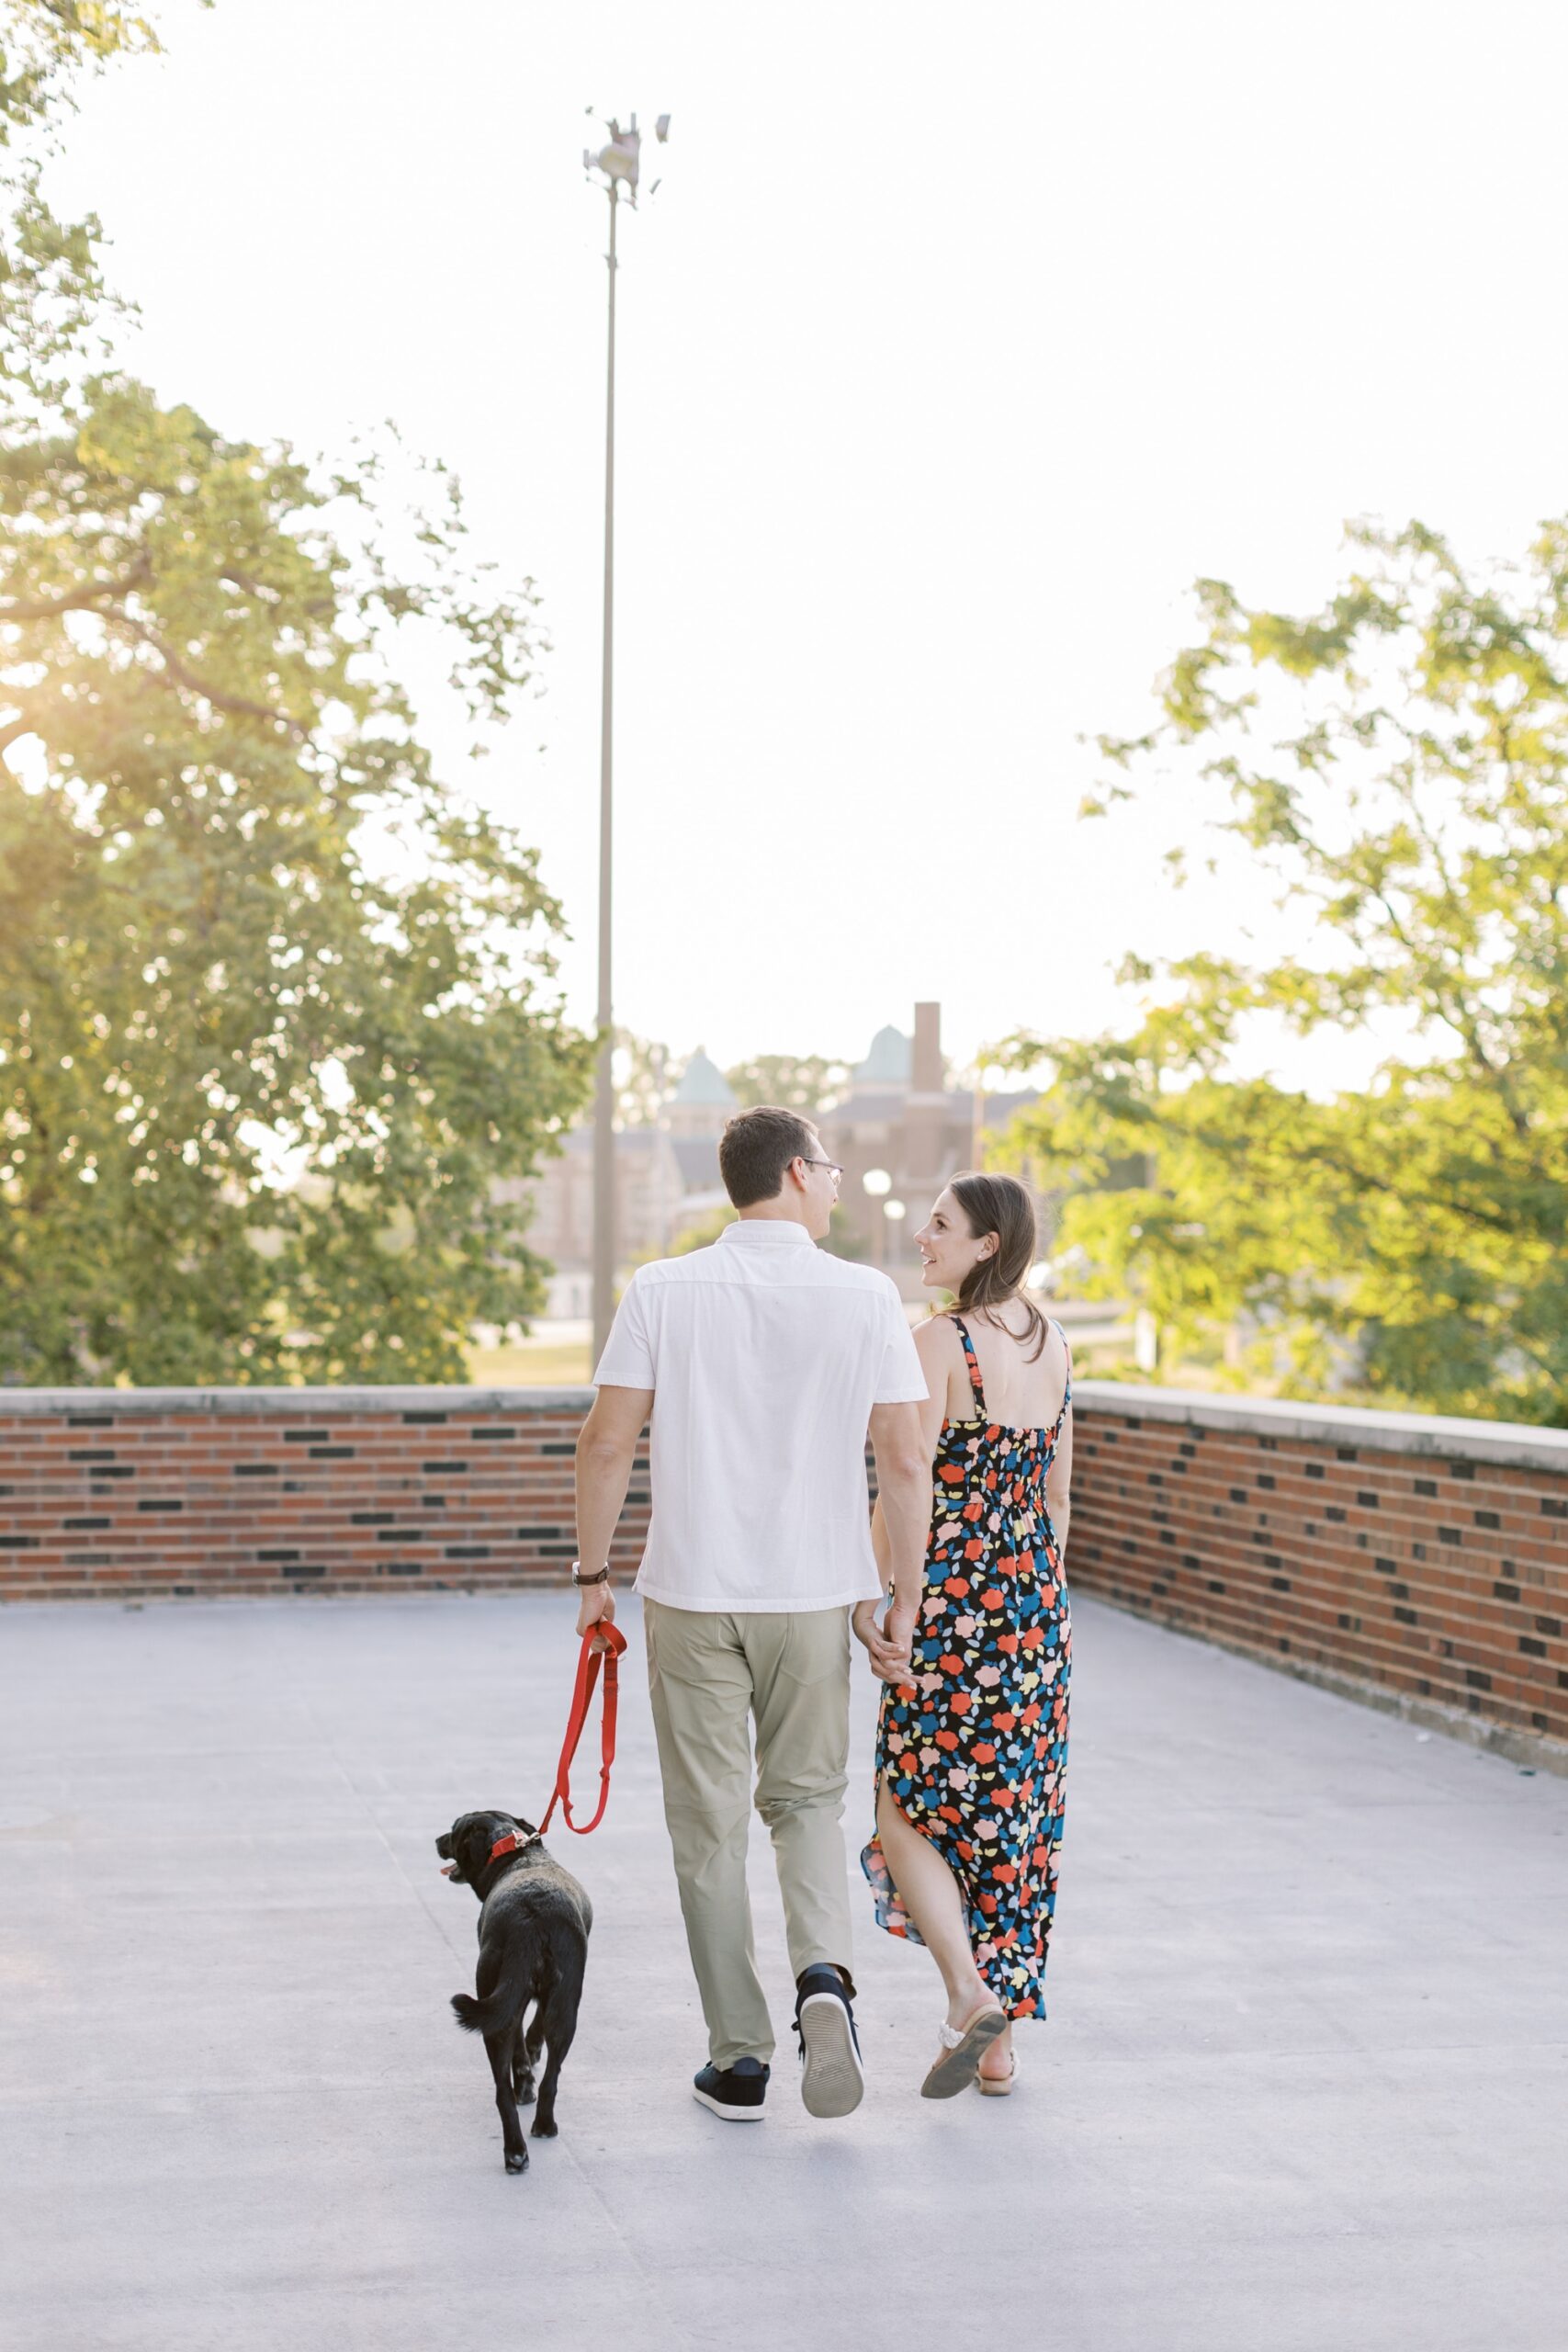 the couple walked with their dog in the Chicago park